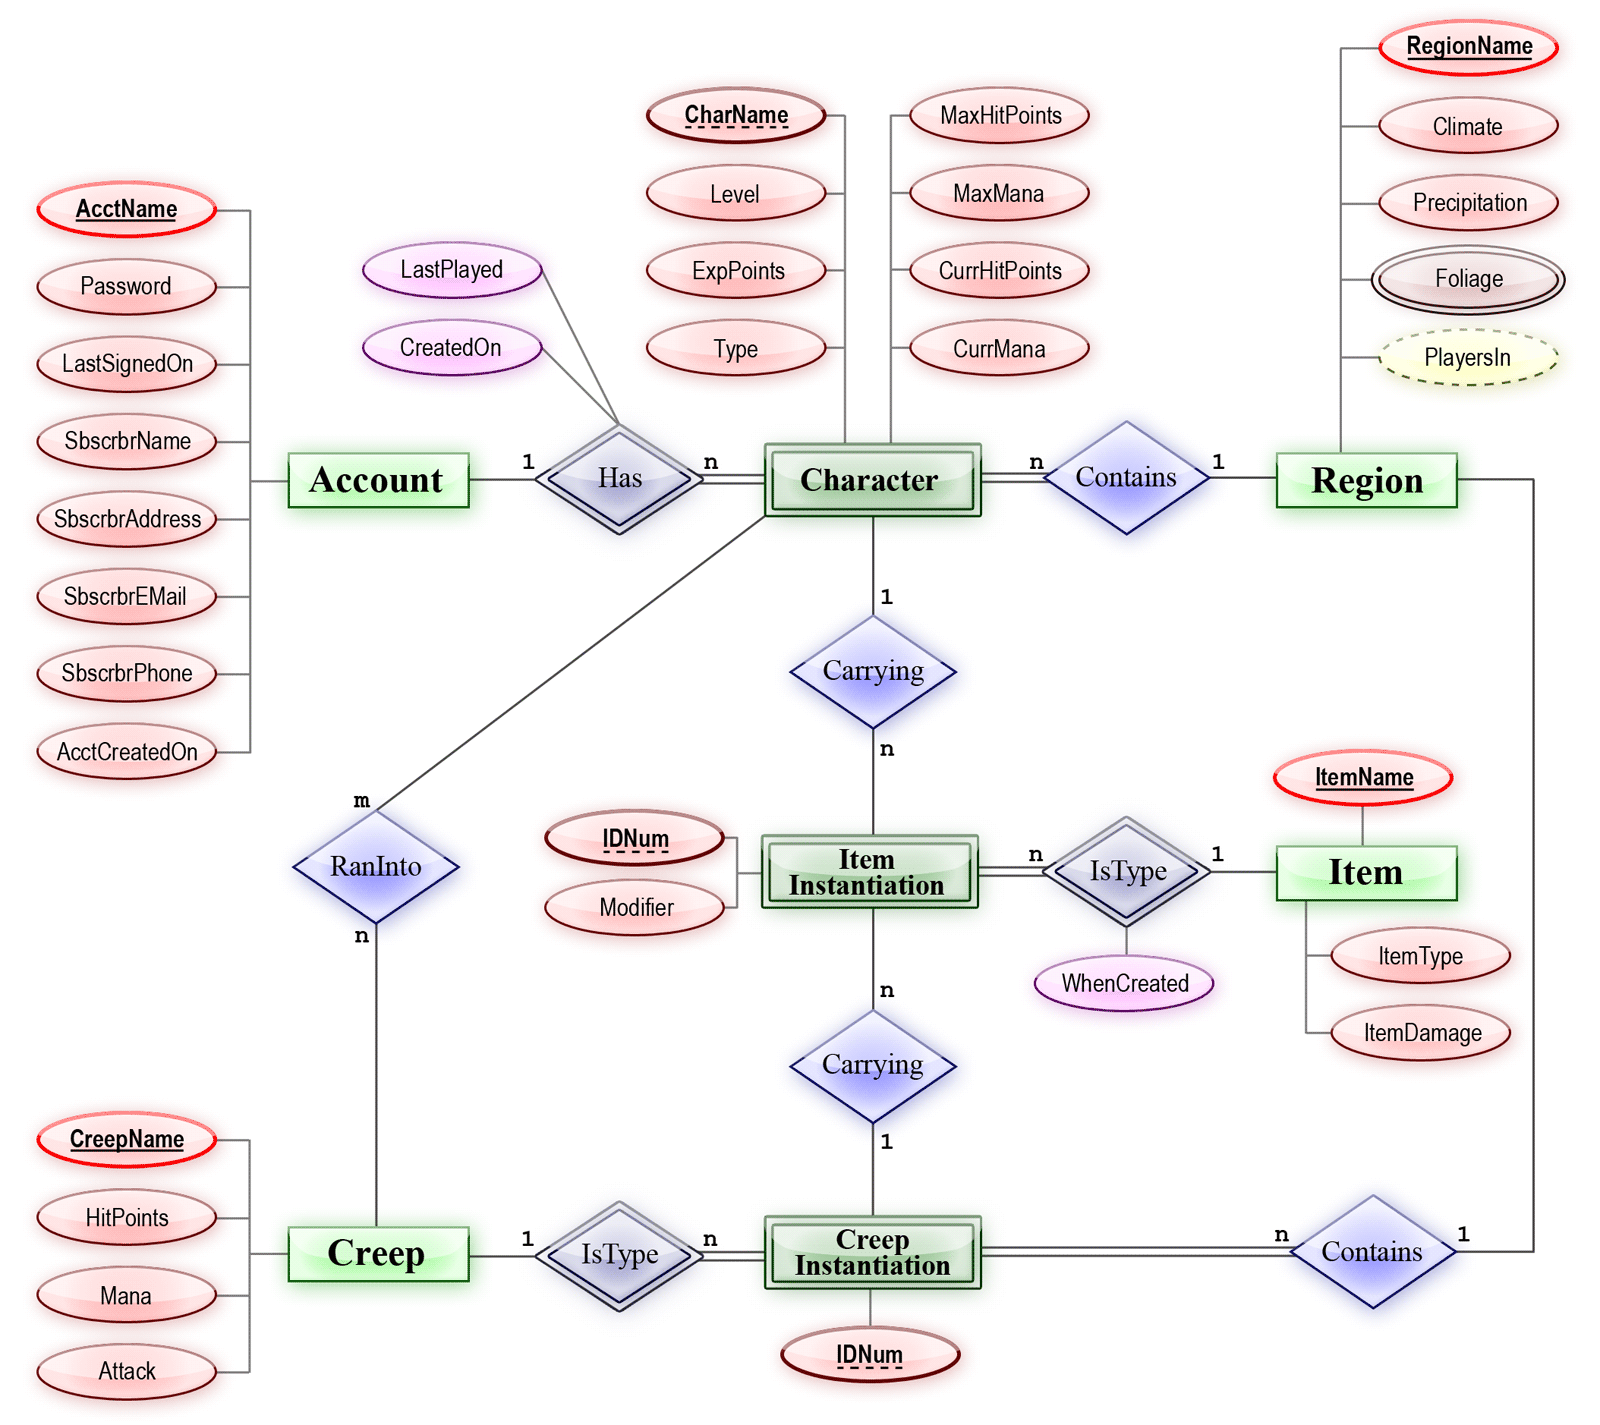 A Schema, http://upload.wikimedia.org/wikipedia/commons/7/72/ER_Diagram_MMORPG.png